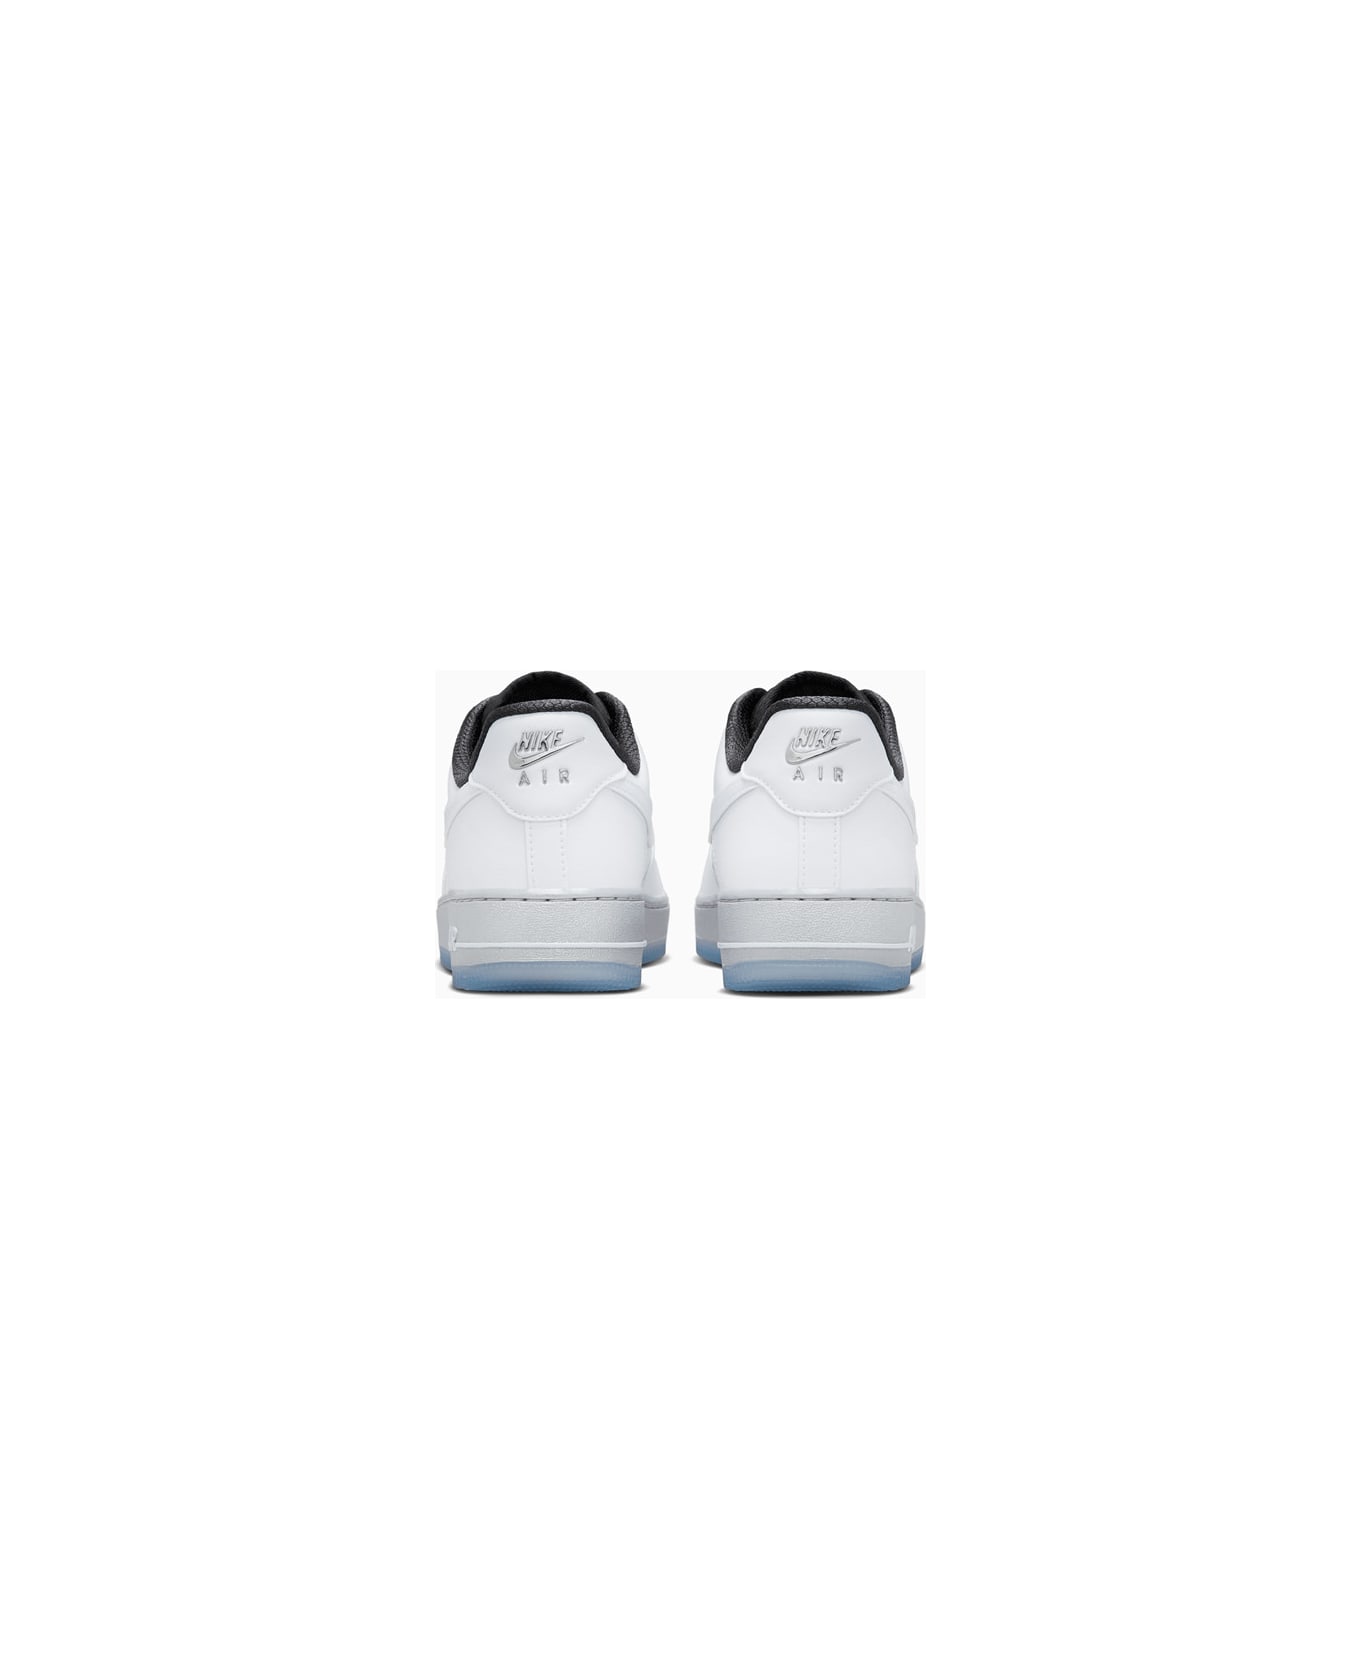 Nike Air Force 1 '07 Se (w) Sneakers Dx6764-100 - White